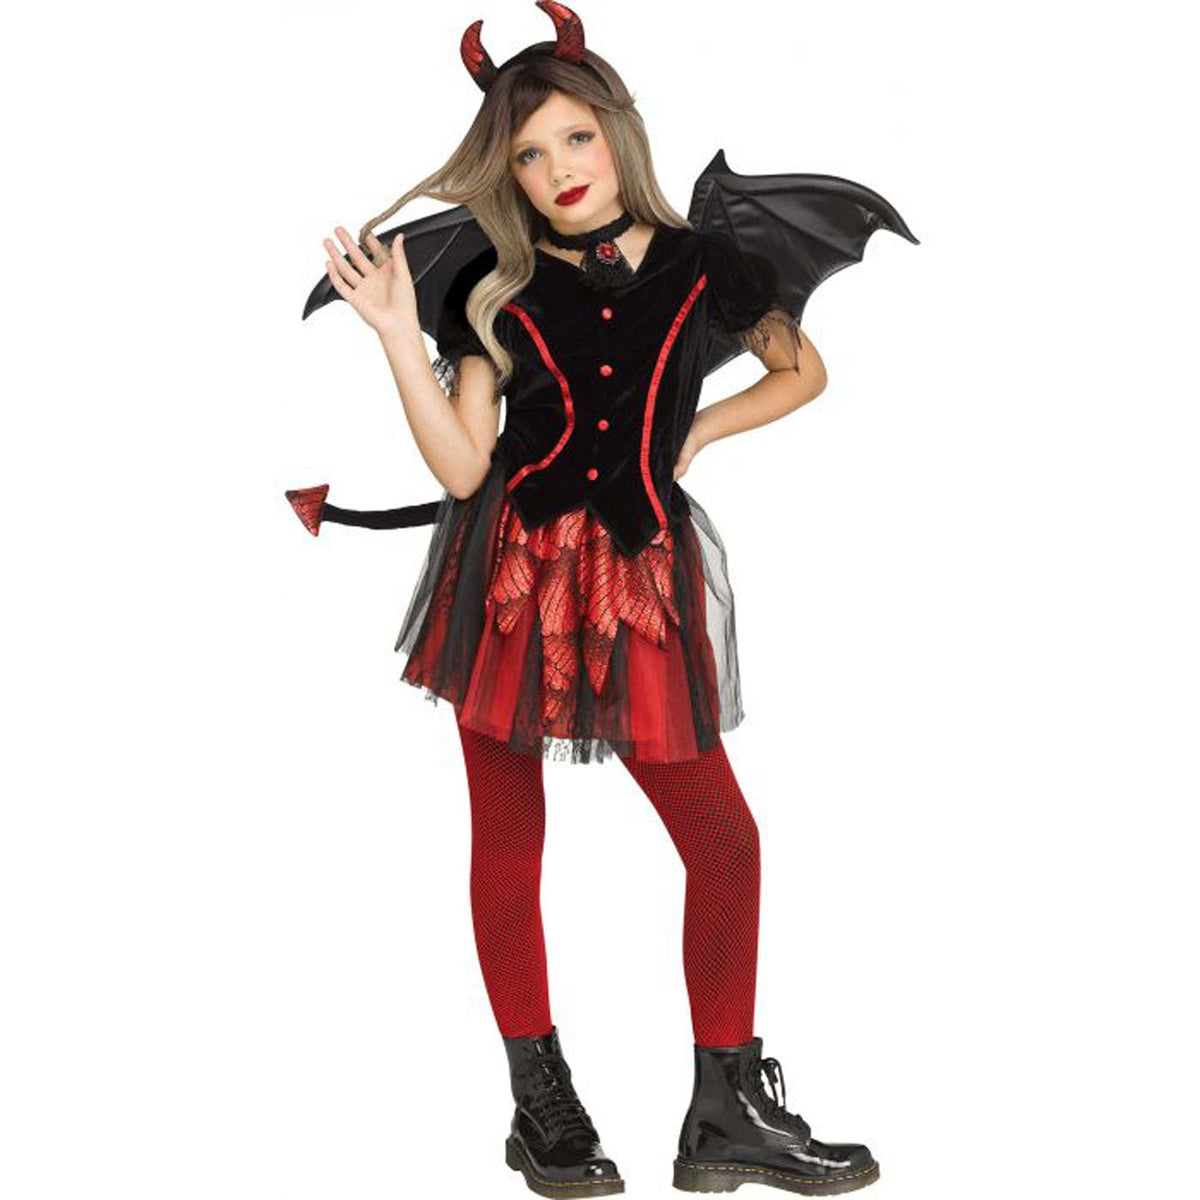 FUN WORLD Costumes Devil Costume for Kids, Black and Red Dress